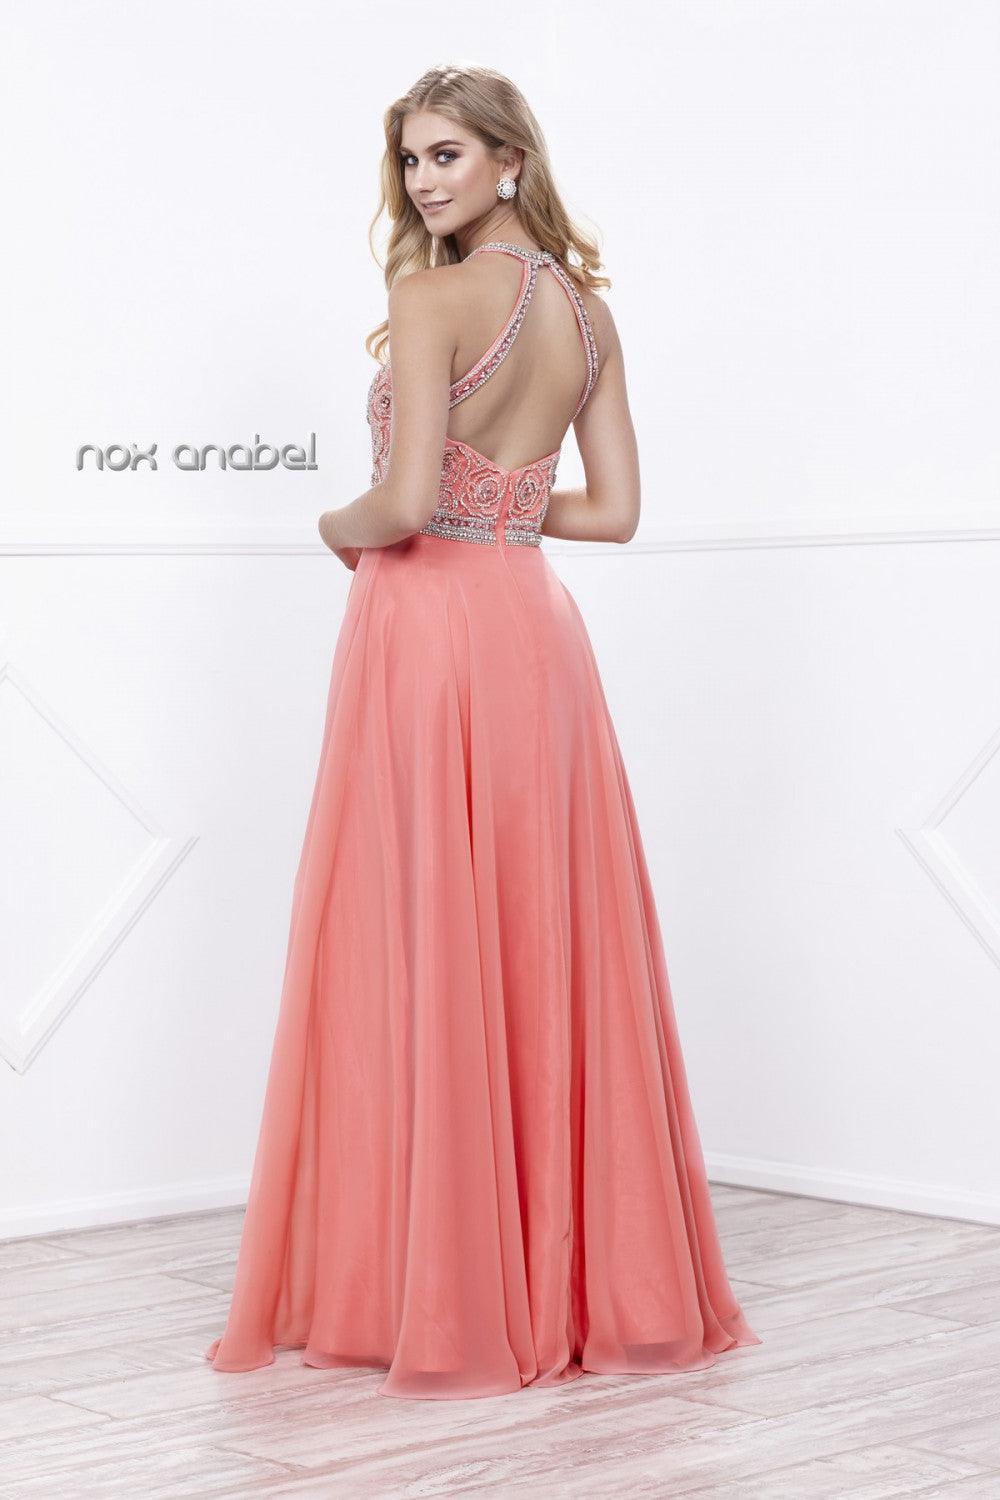 Long High Neck Jeweled Prom Dress - The Dress Outlet Nox Anabel